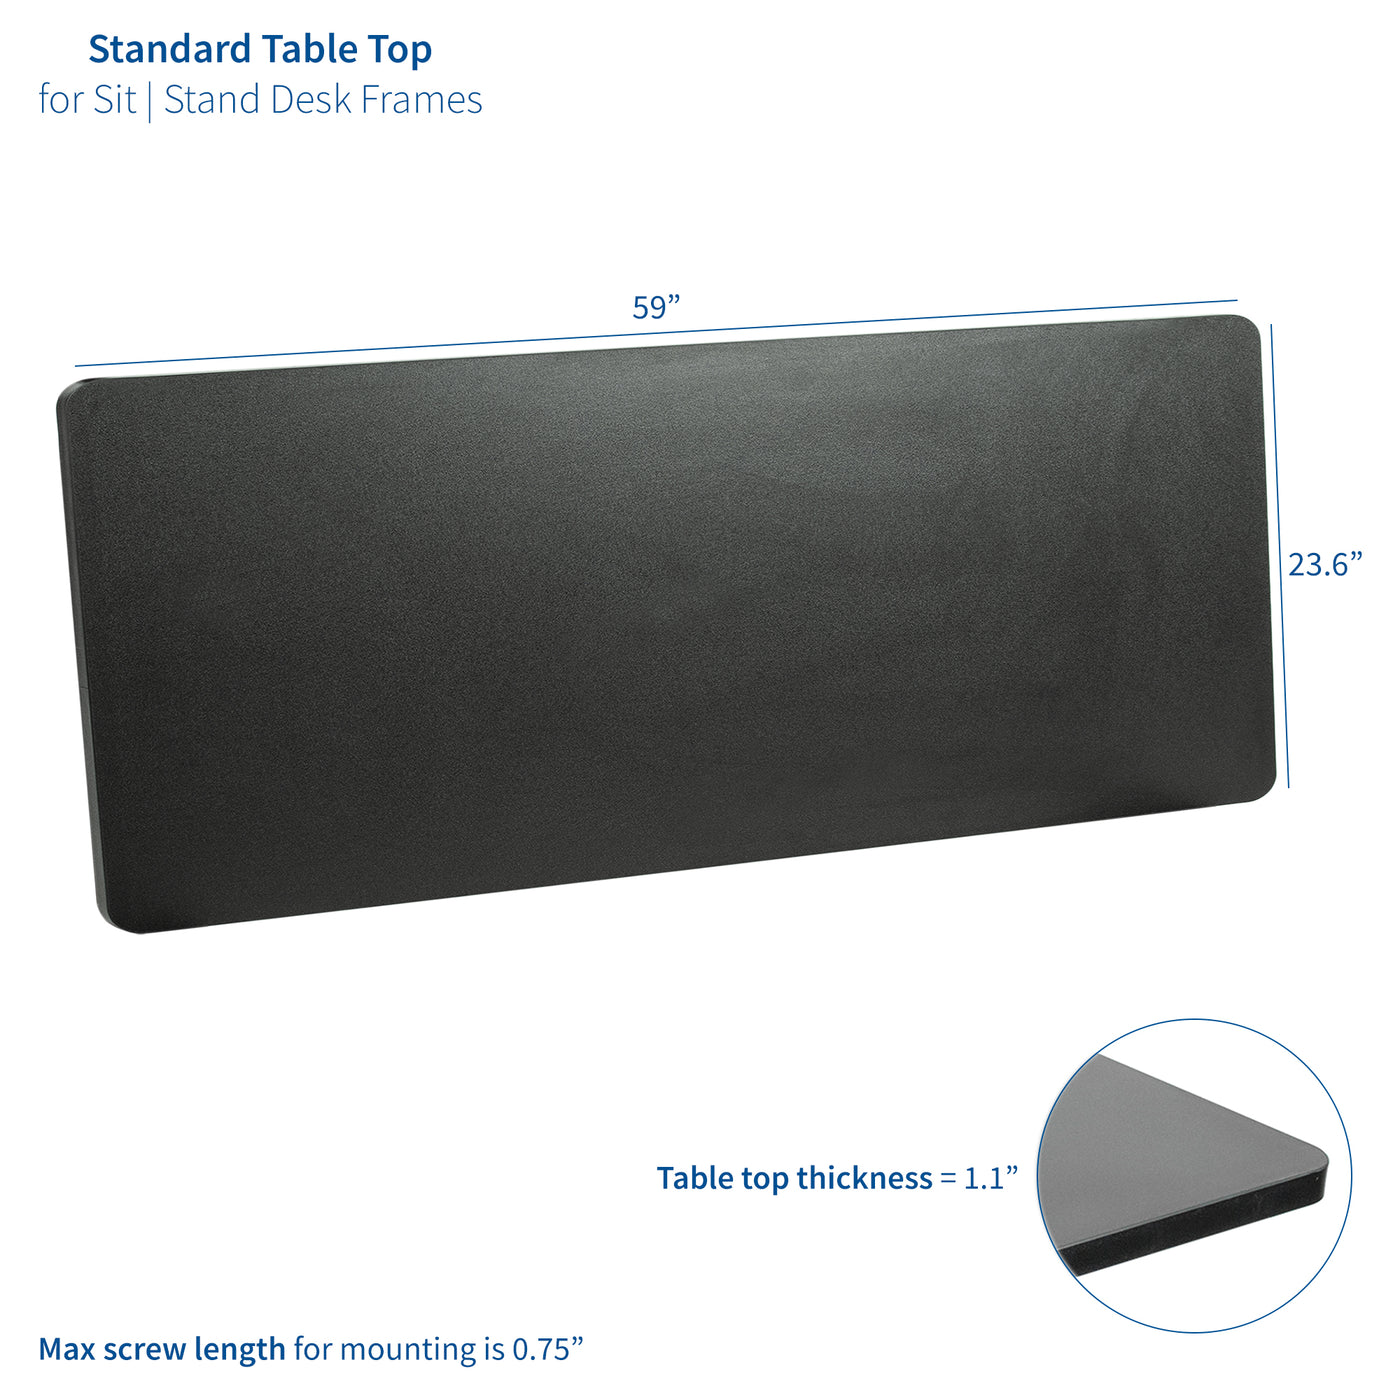 One inch thick modern black table top.